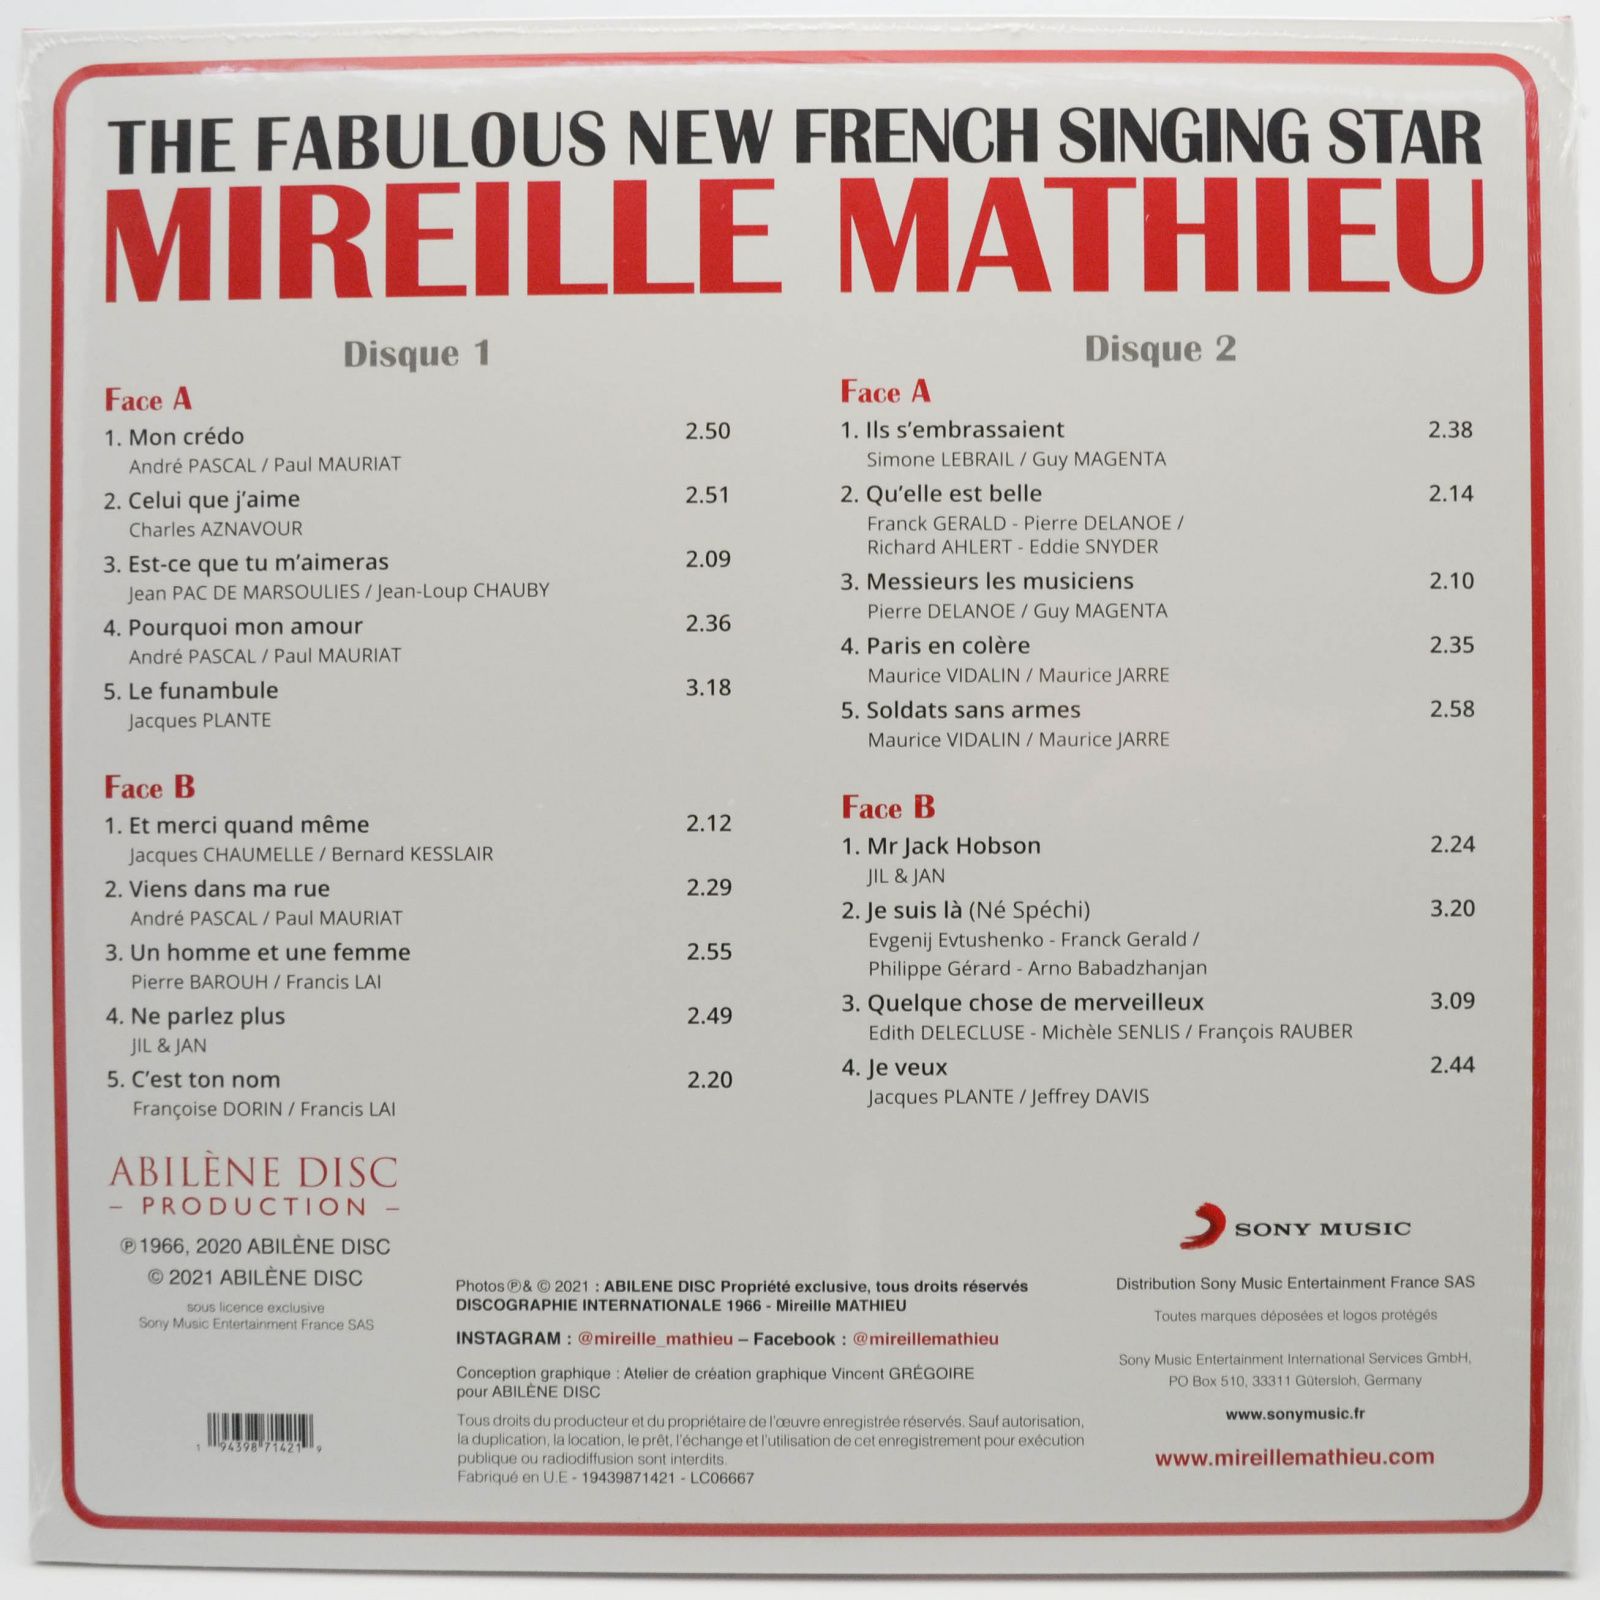 Mireille Mathieu — The Fabulous New French Singing Star (2LP, France), 1966